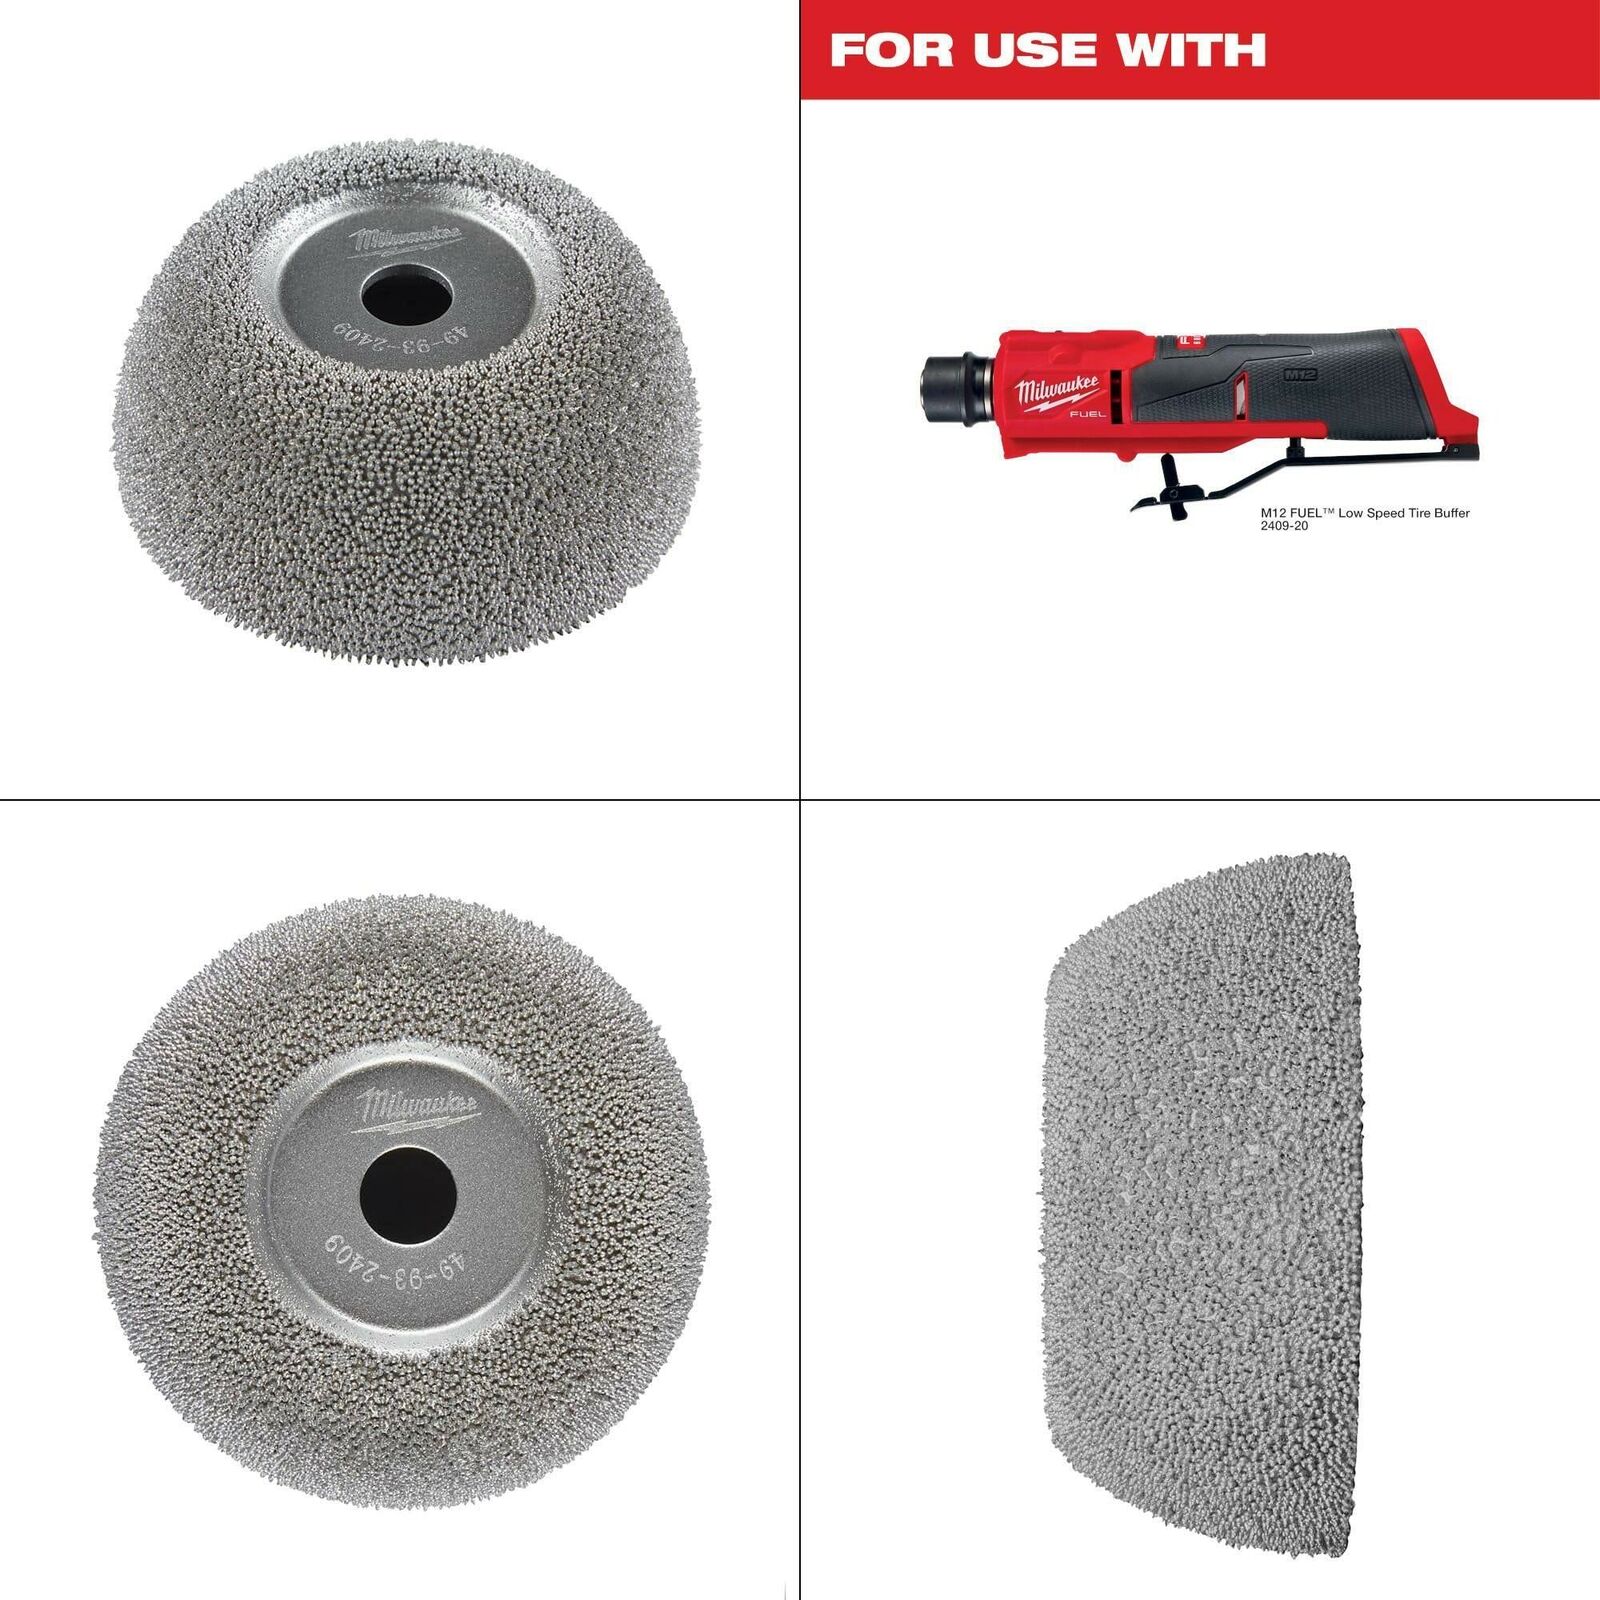 2-1/2 In. Flared Contour Low Speed Tire Buffing Wheel | Milwaukee Fuel Buffer